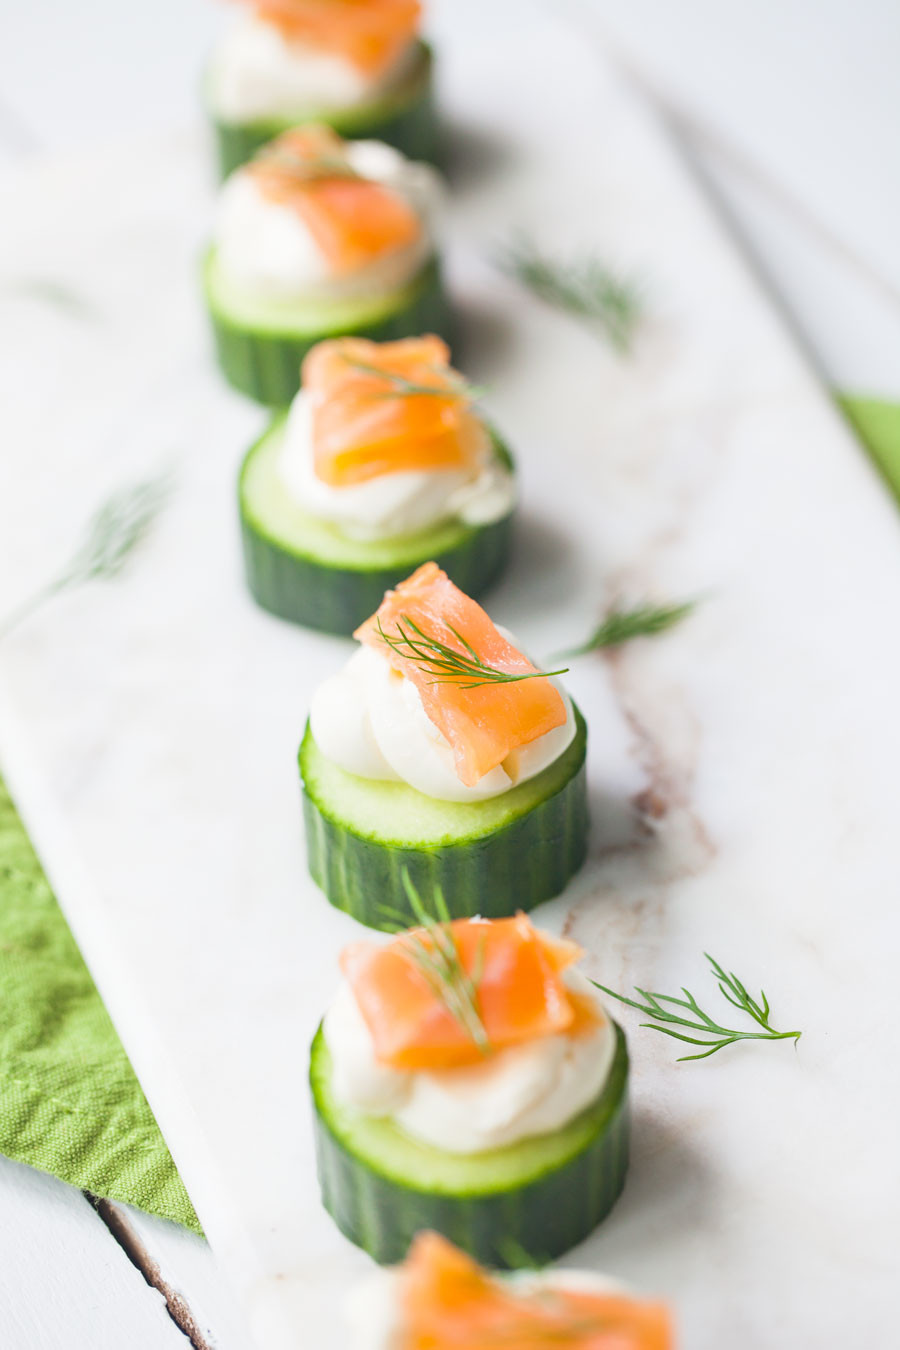 Smoked Salmon And Cream Cheese Appetizer
 Cucumber and Smoked Salmon Hors D oeuvres